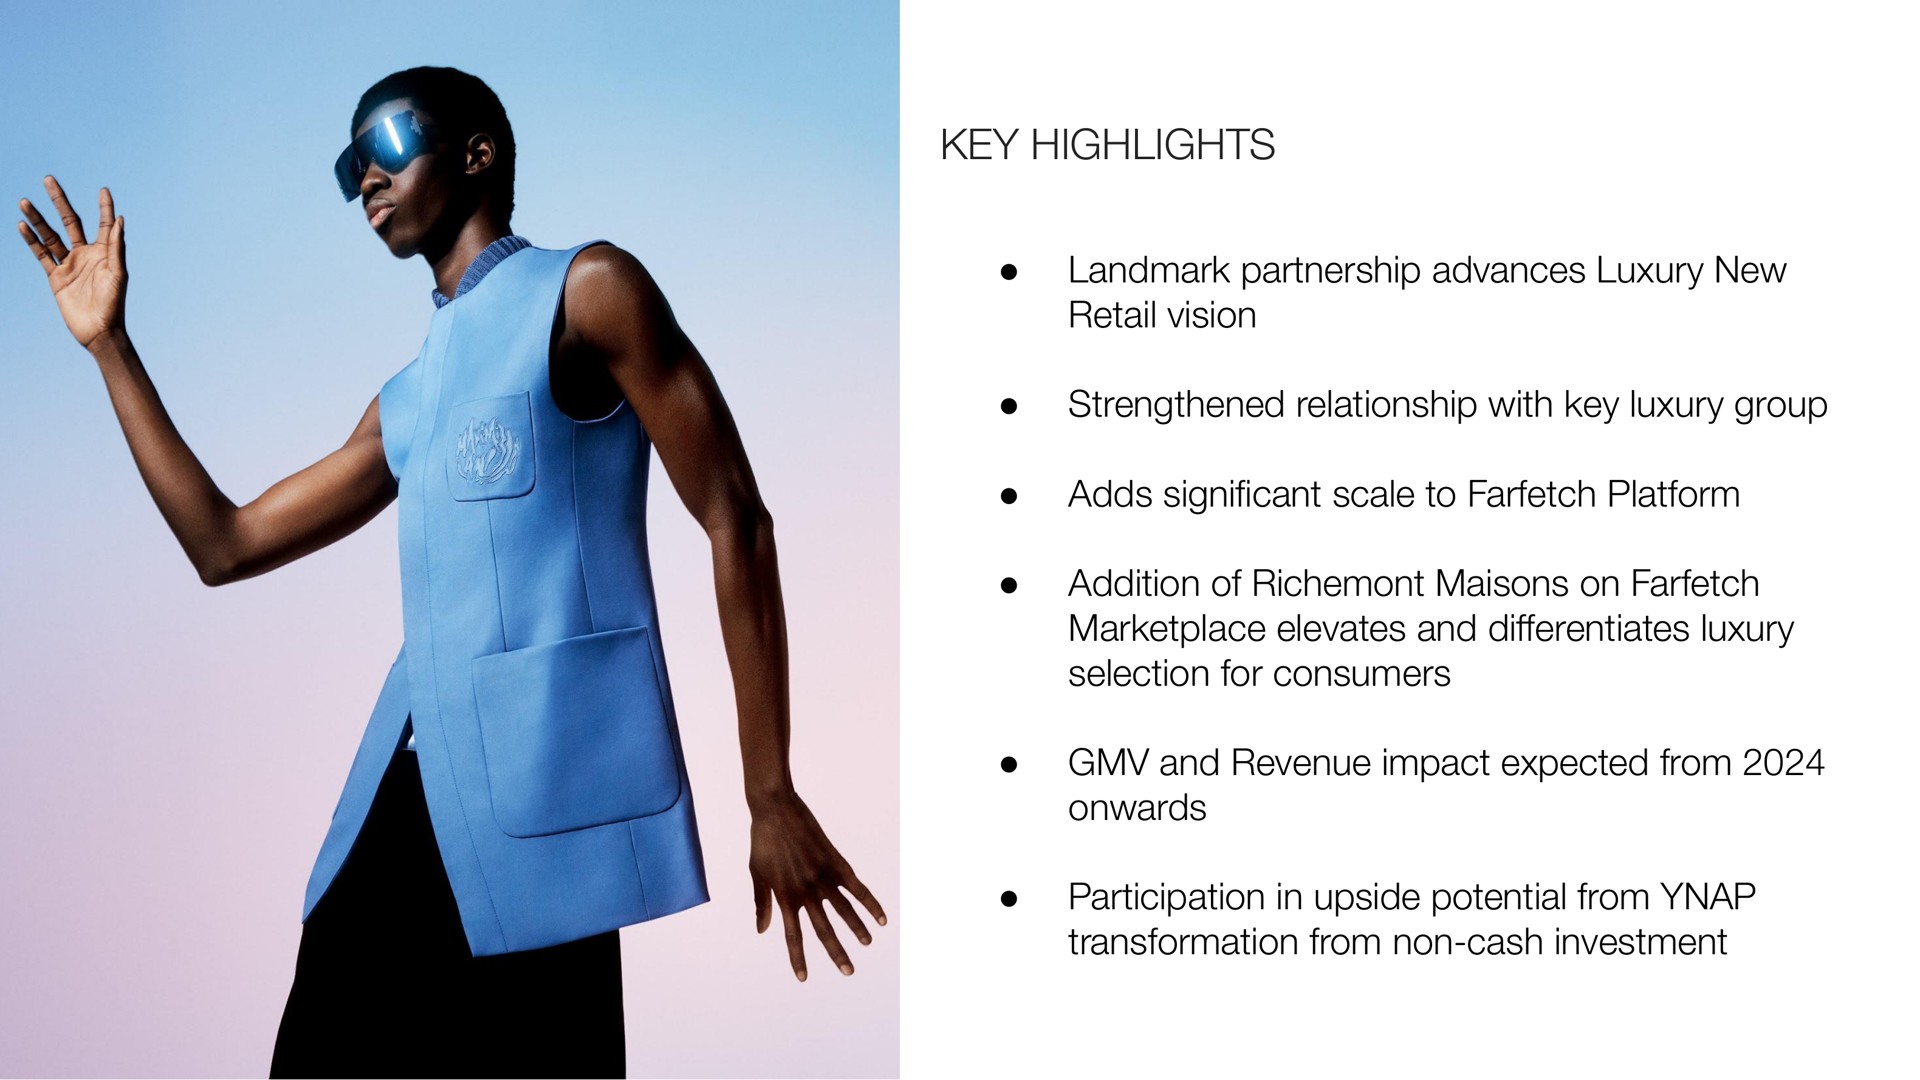 key highlights landmark partnership advances luxury new retail vision strengthened relationship with key luxury group adds significant scale to platform addition of on elevates and differentiates luxury and revenue impact expected from onwards participation in upside potential from | Farfetch